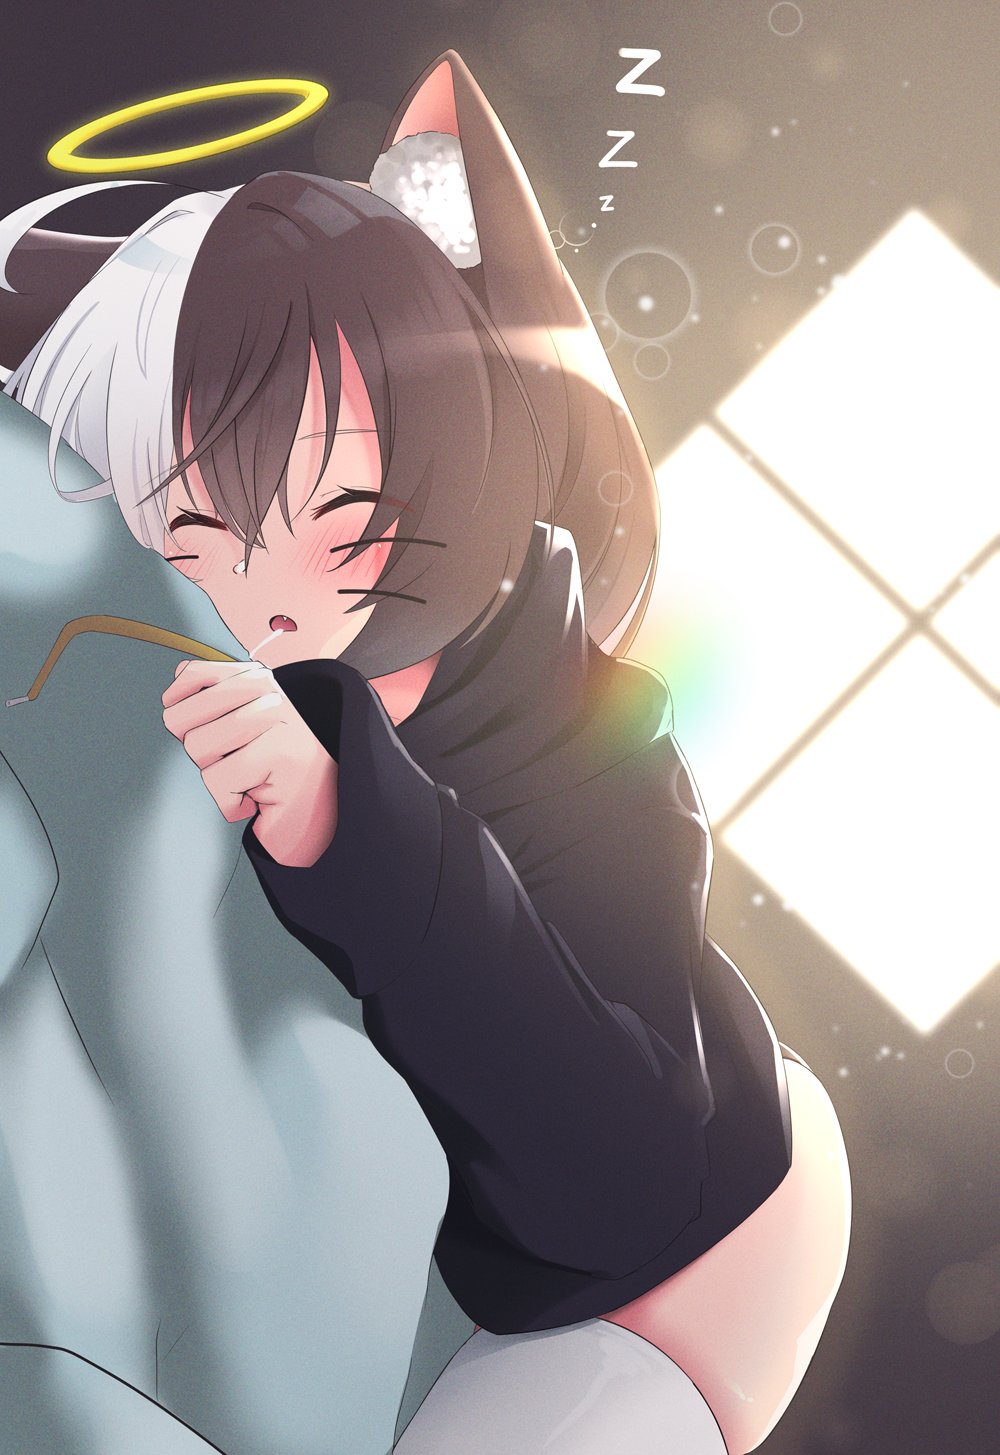 1girls :3 ass big_ass big_breasts black_clothes black_clothing black_hair black_shoes breasts cat_ears cat_humanoid cat_tail catgirl dawn embarrassed feline hair_up holding_object in_bed looking_at_viewer moustache peace_sign pink_eyes serpias sleeping tezbert_dusk13 twitch twitch.tv twitching twitter v virtual_youtuber vtuber white_footwear white_hair window yellow_eyes youtube youtube_hispanic youtuber youtuber_girl zzz